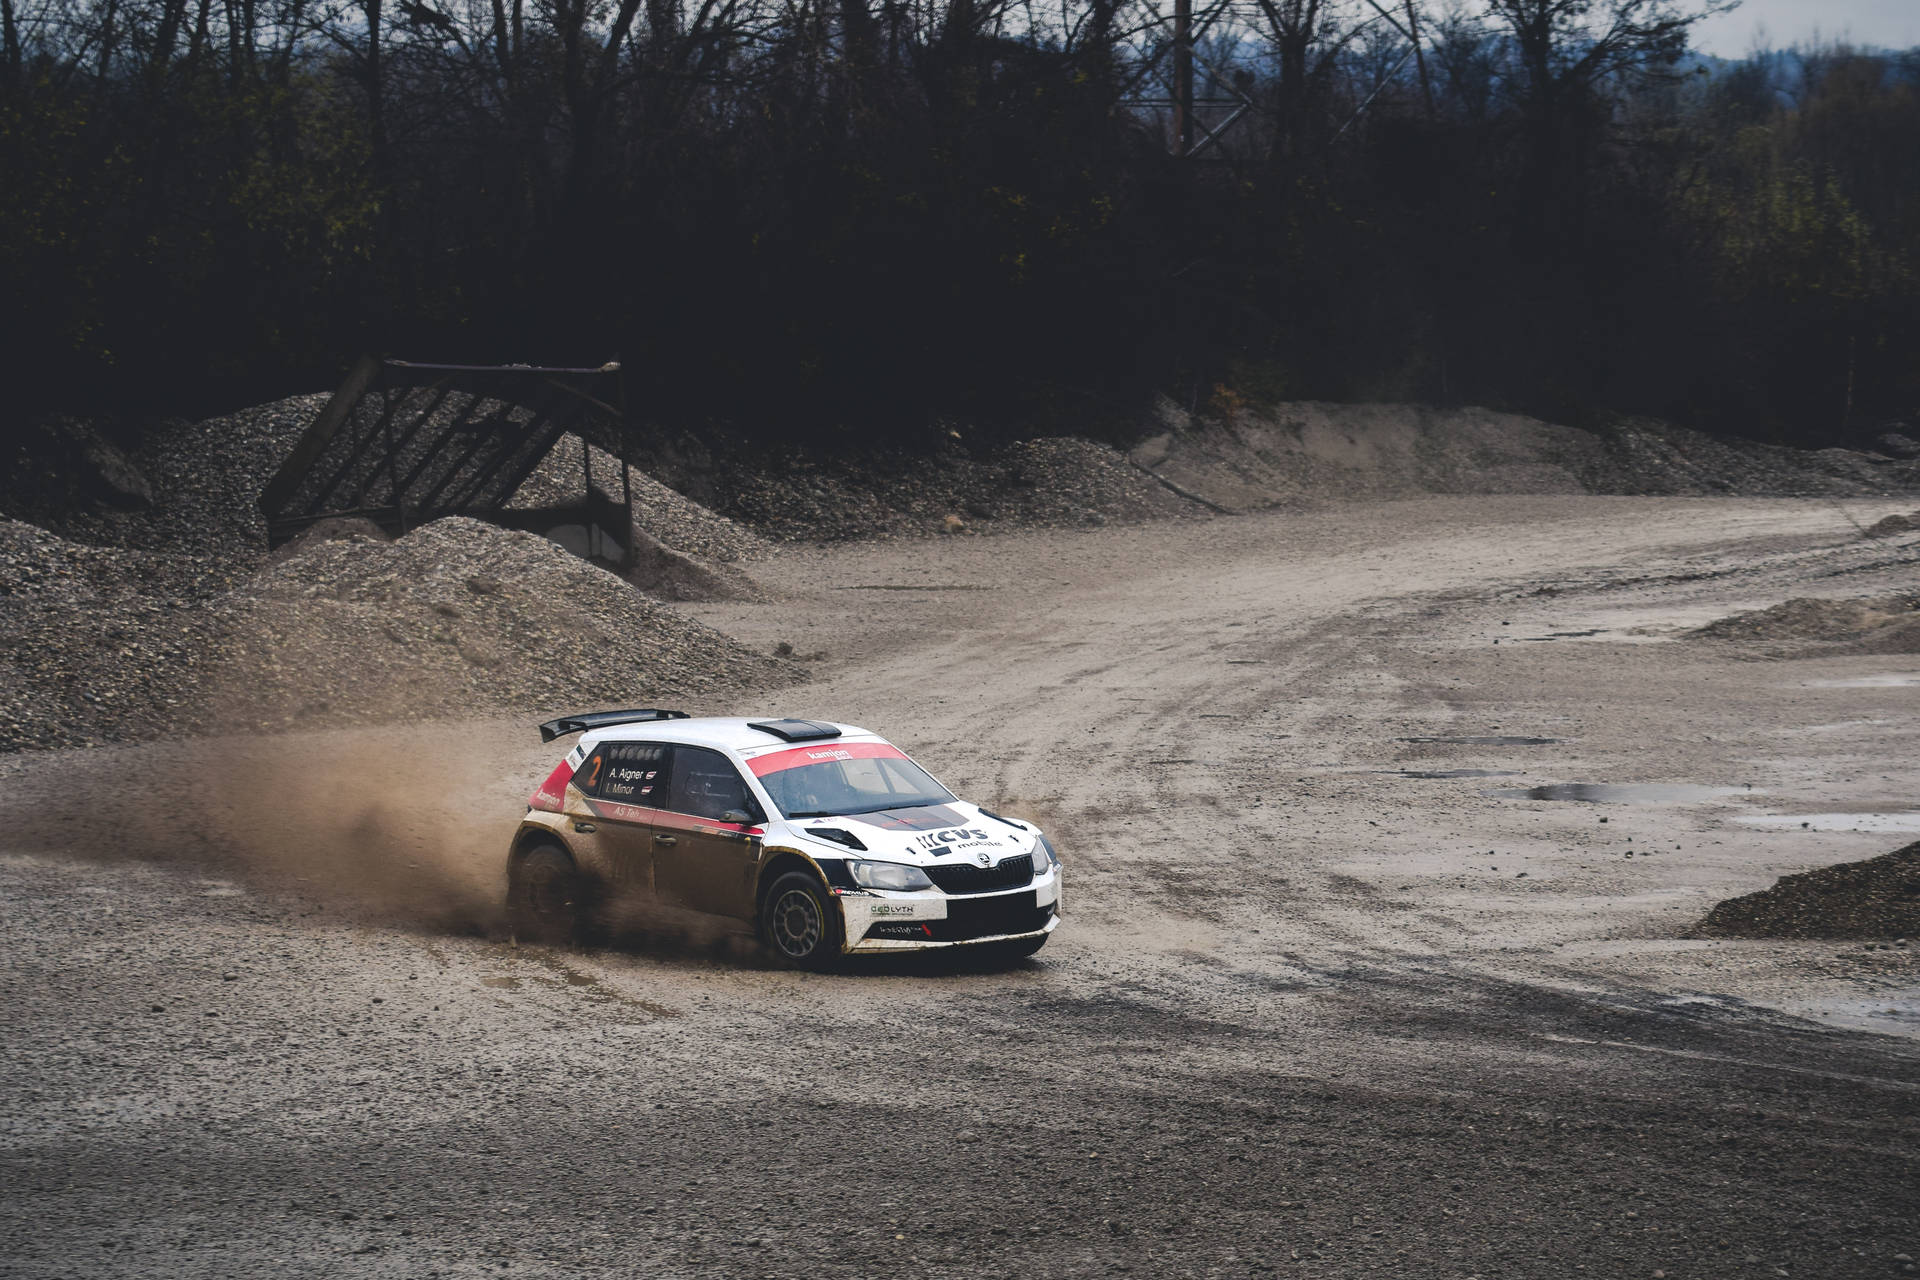 Stunning capture of a Skoda R5 competing in Dirt Rally. Wallpaper